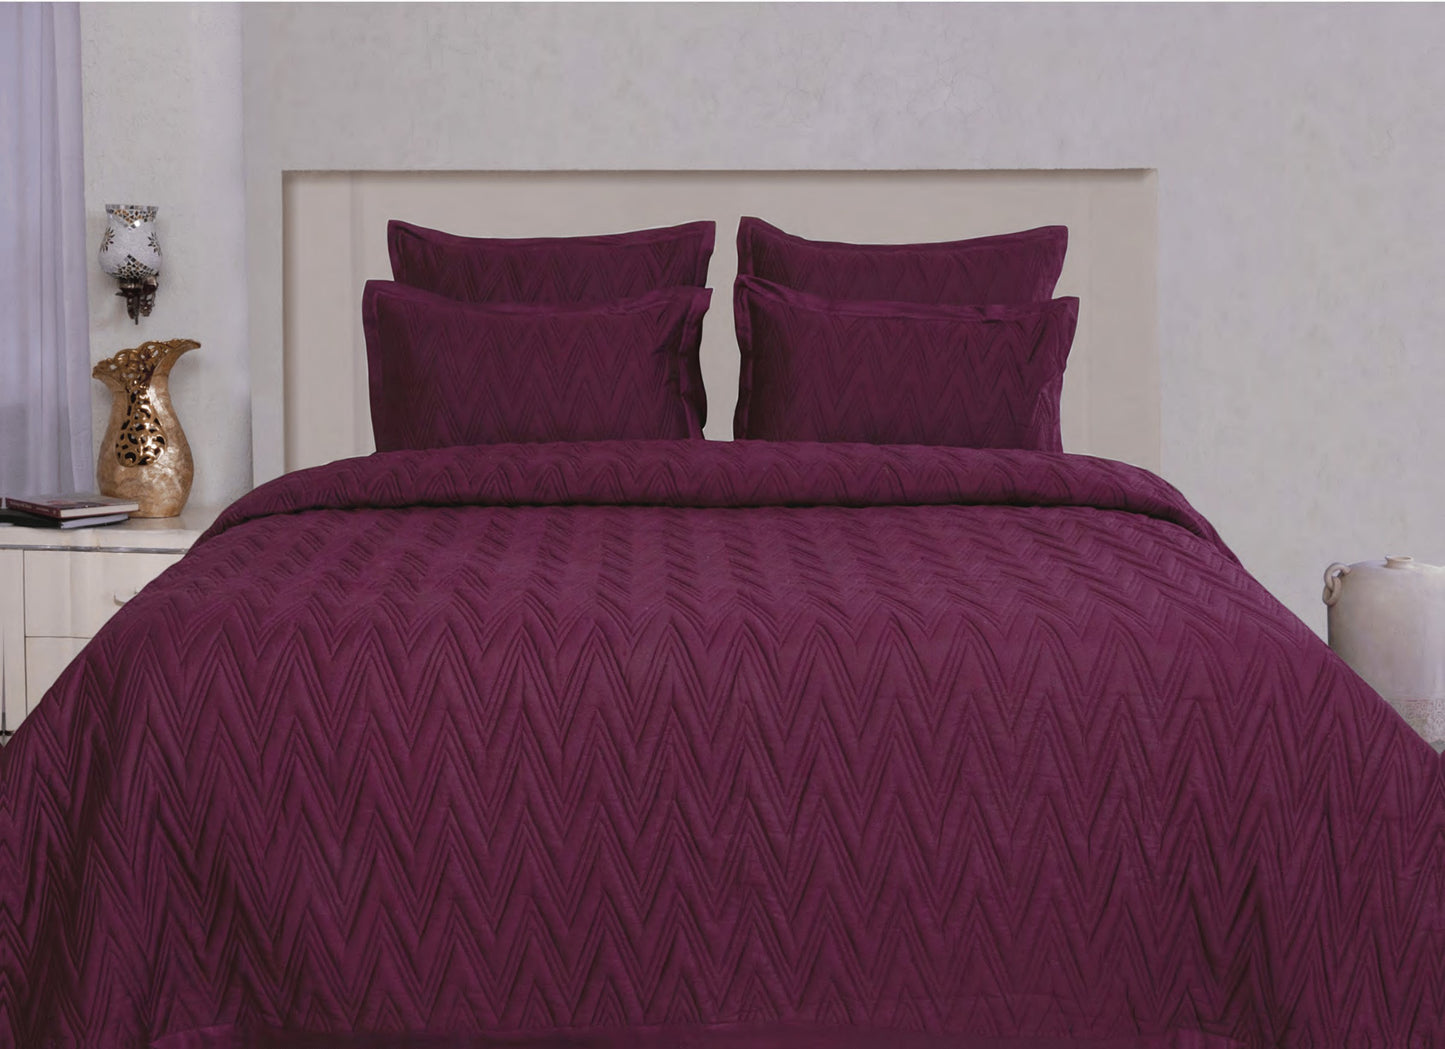 Quilted Bedsheet 100% Cotton Sateen Fabric Wine